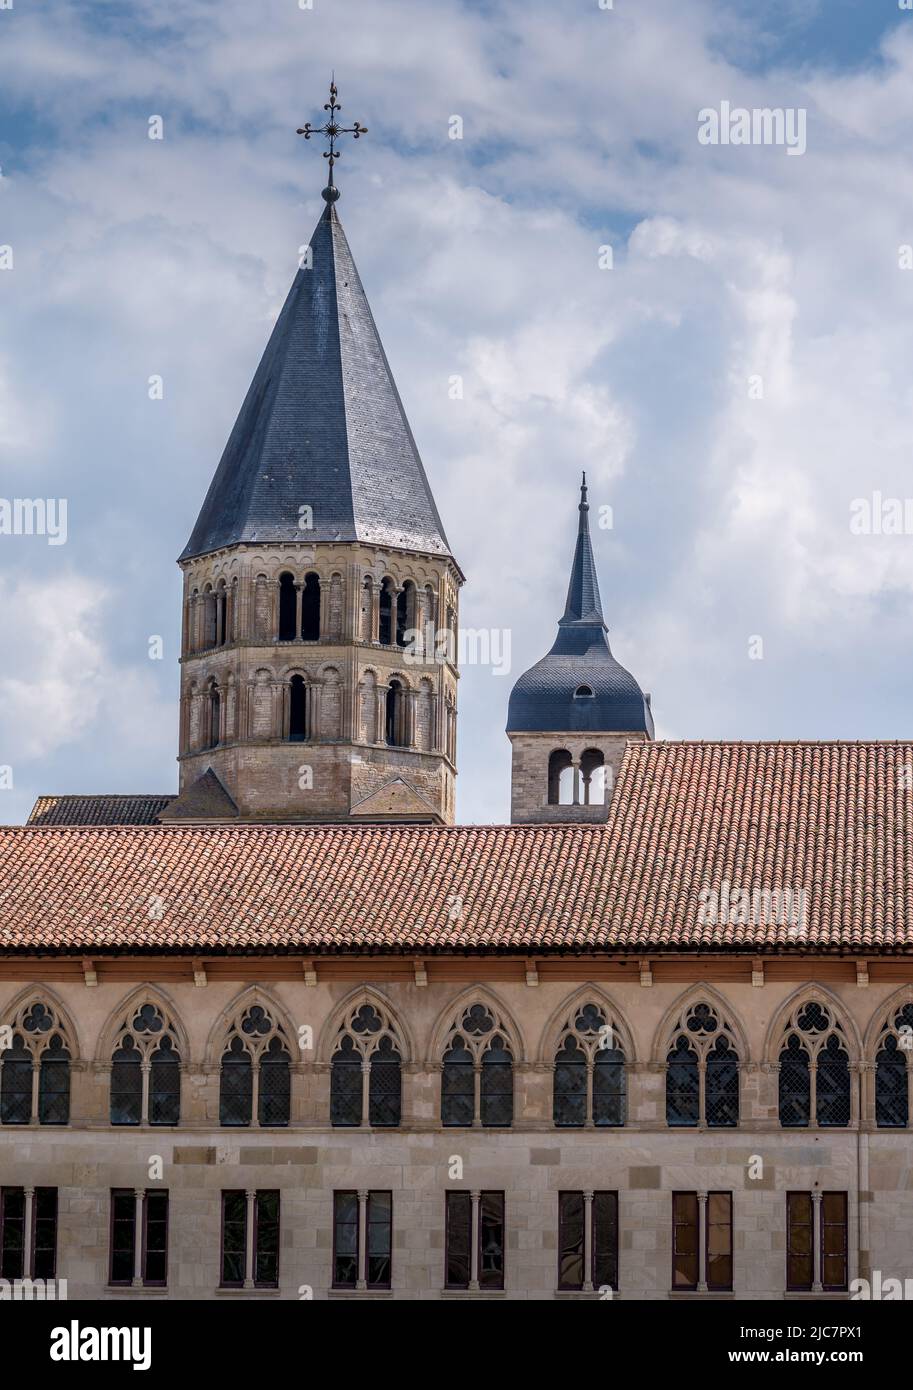 View of a row of Gothic arch windows and Romanesque church tower with pointed roof at the former Benedict monastery of Cluny France Stock Photo